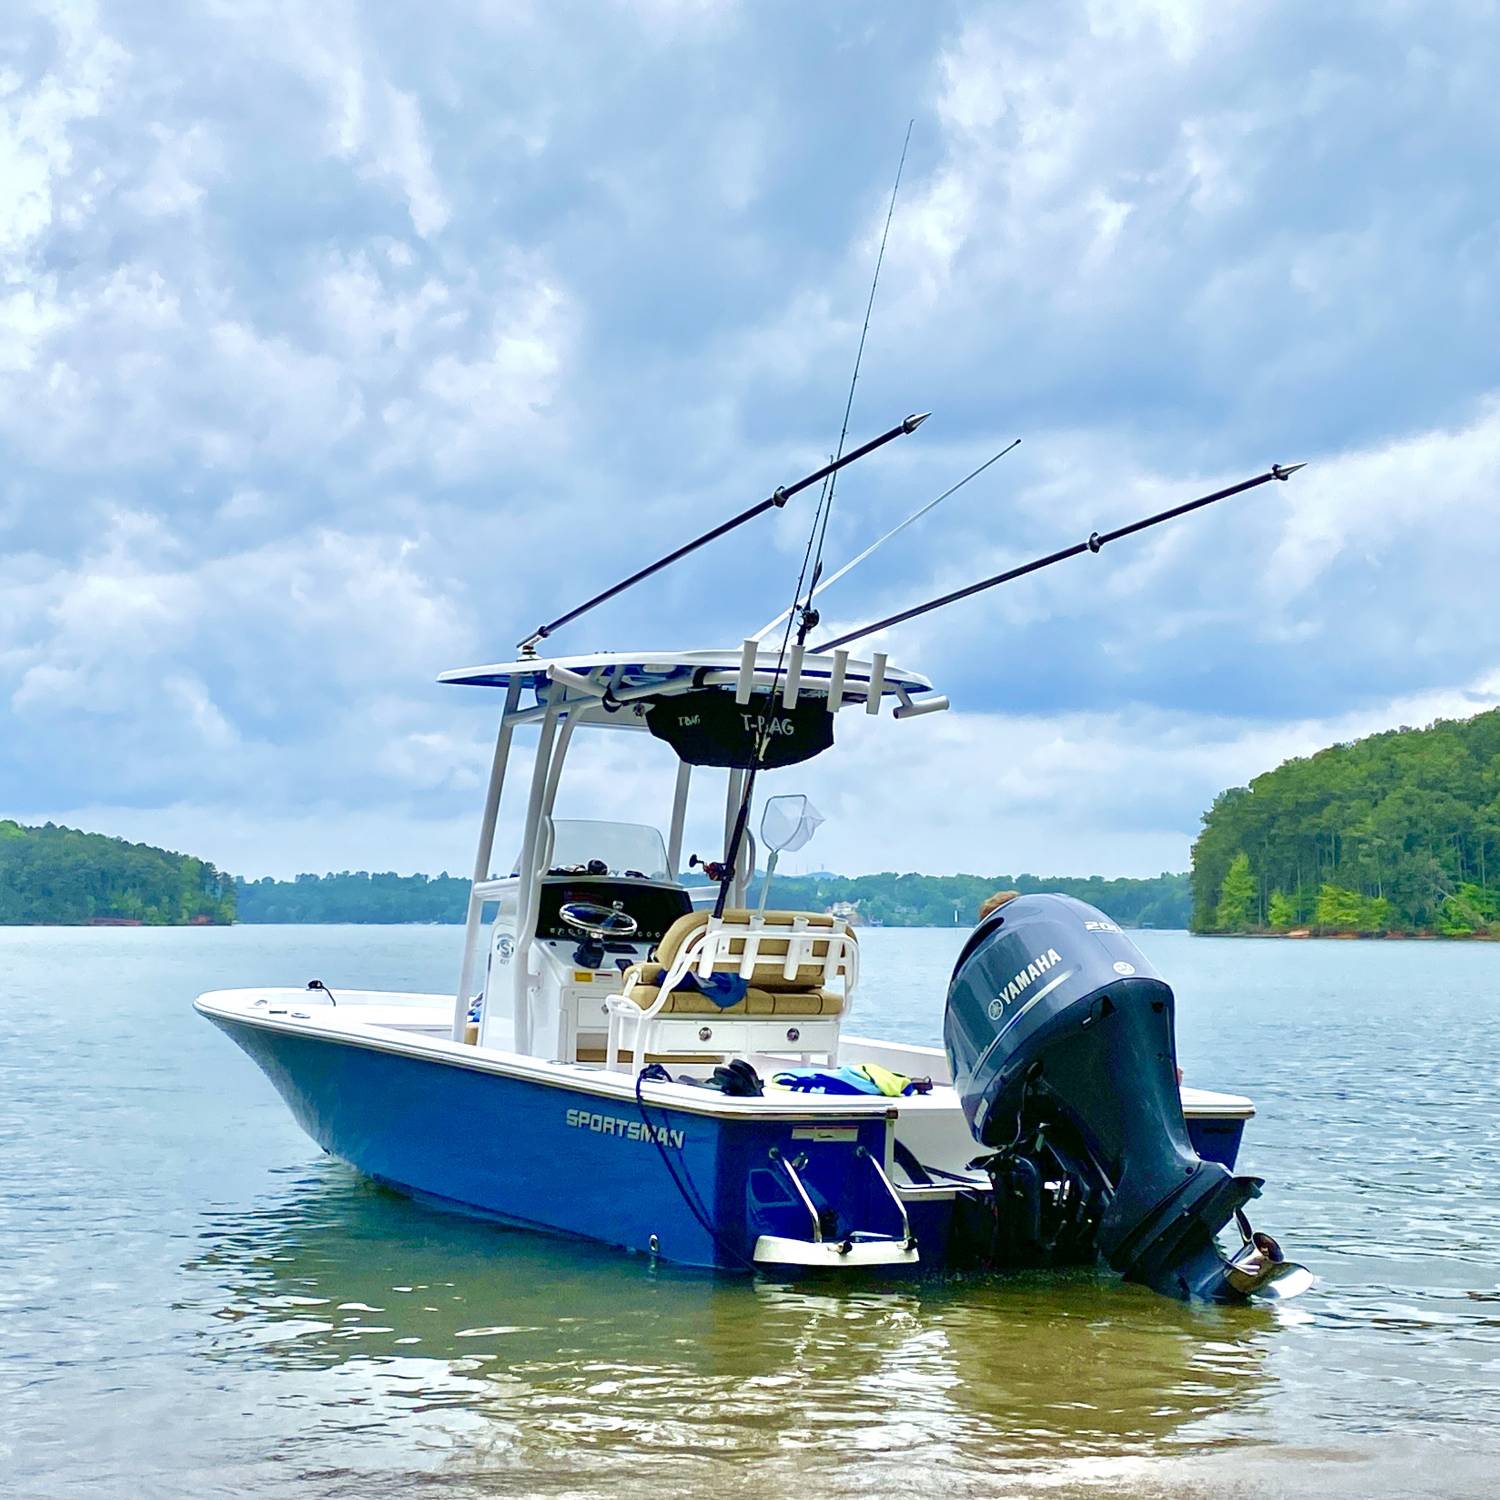 Title: 2022 Masters 227 Platinum - On board their Sportsman Masters 227 Bay Boat - Location: Lake Lanier. Participating in the Photo Contest #SportsmanMay